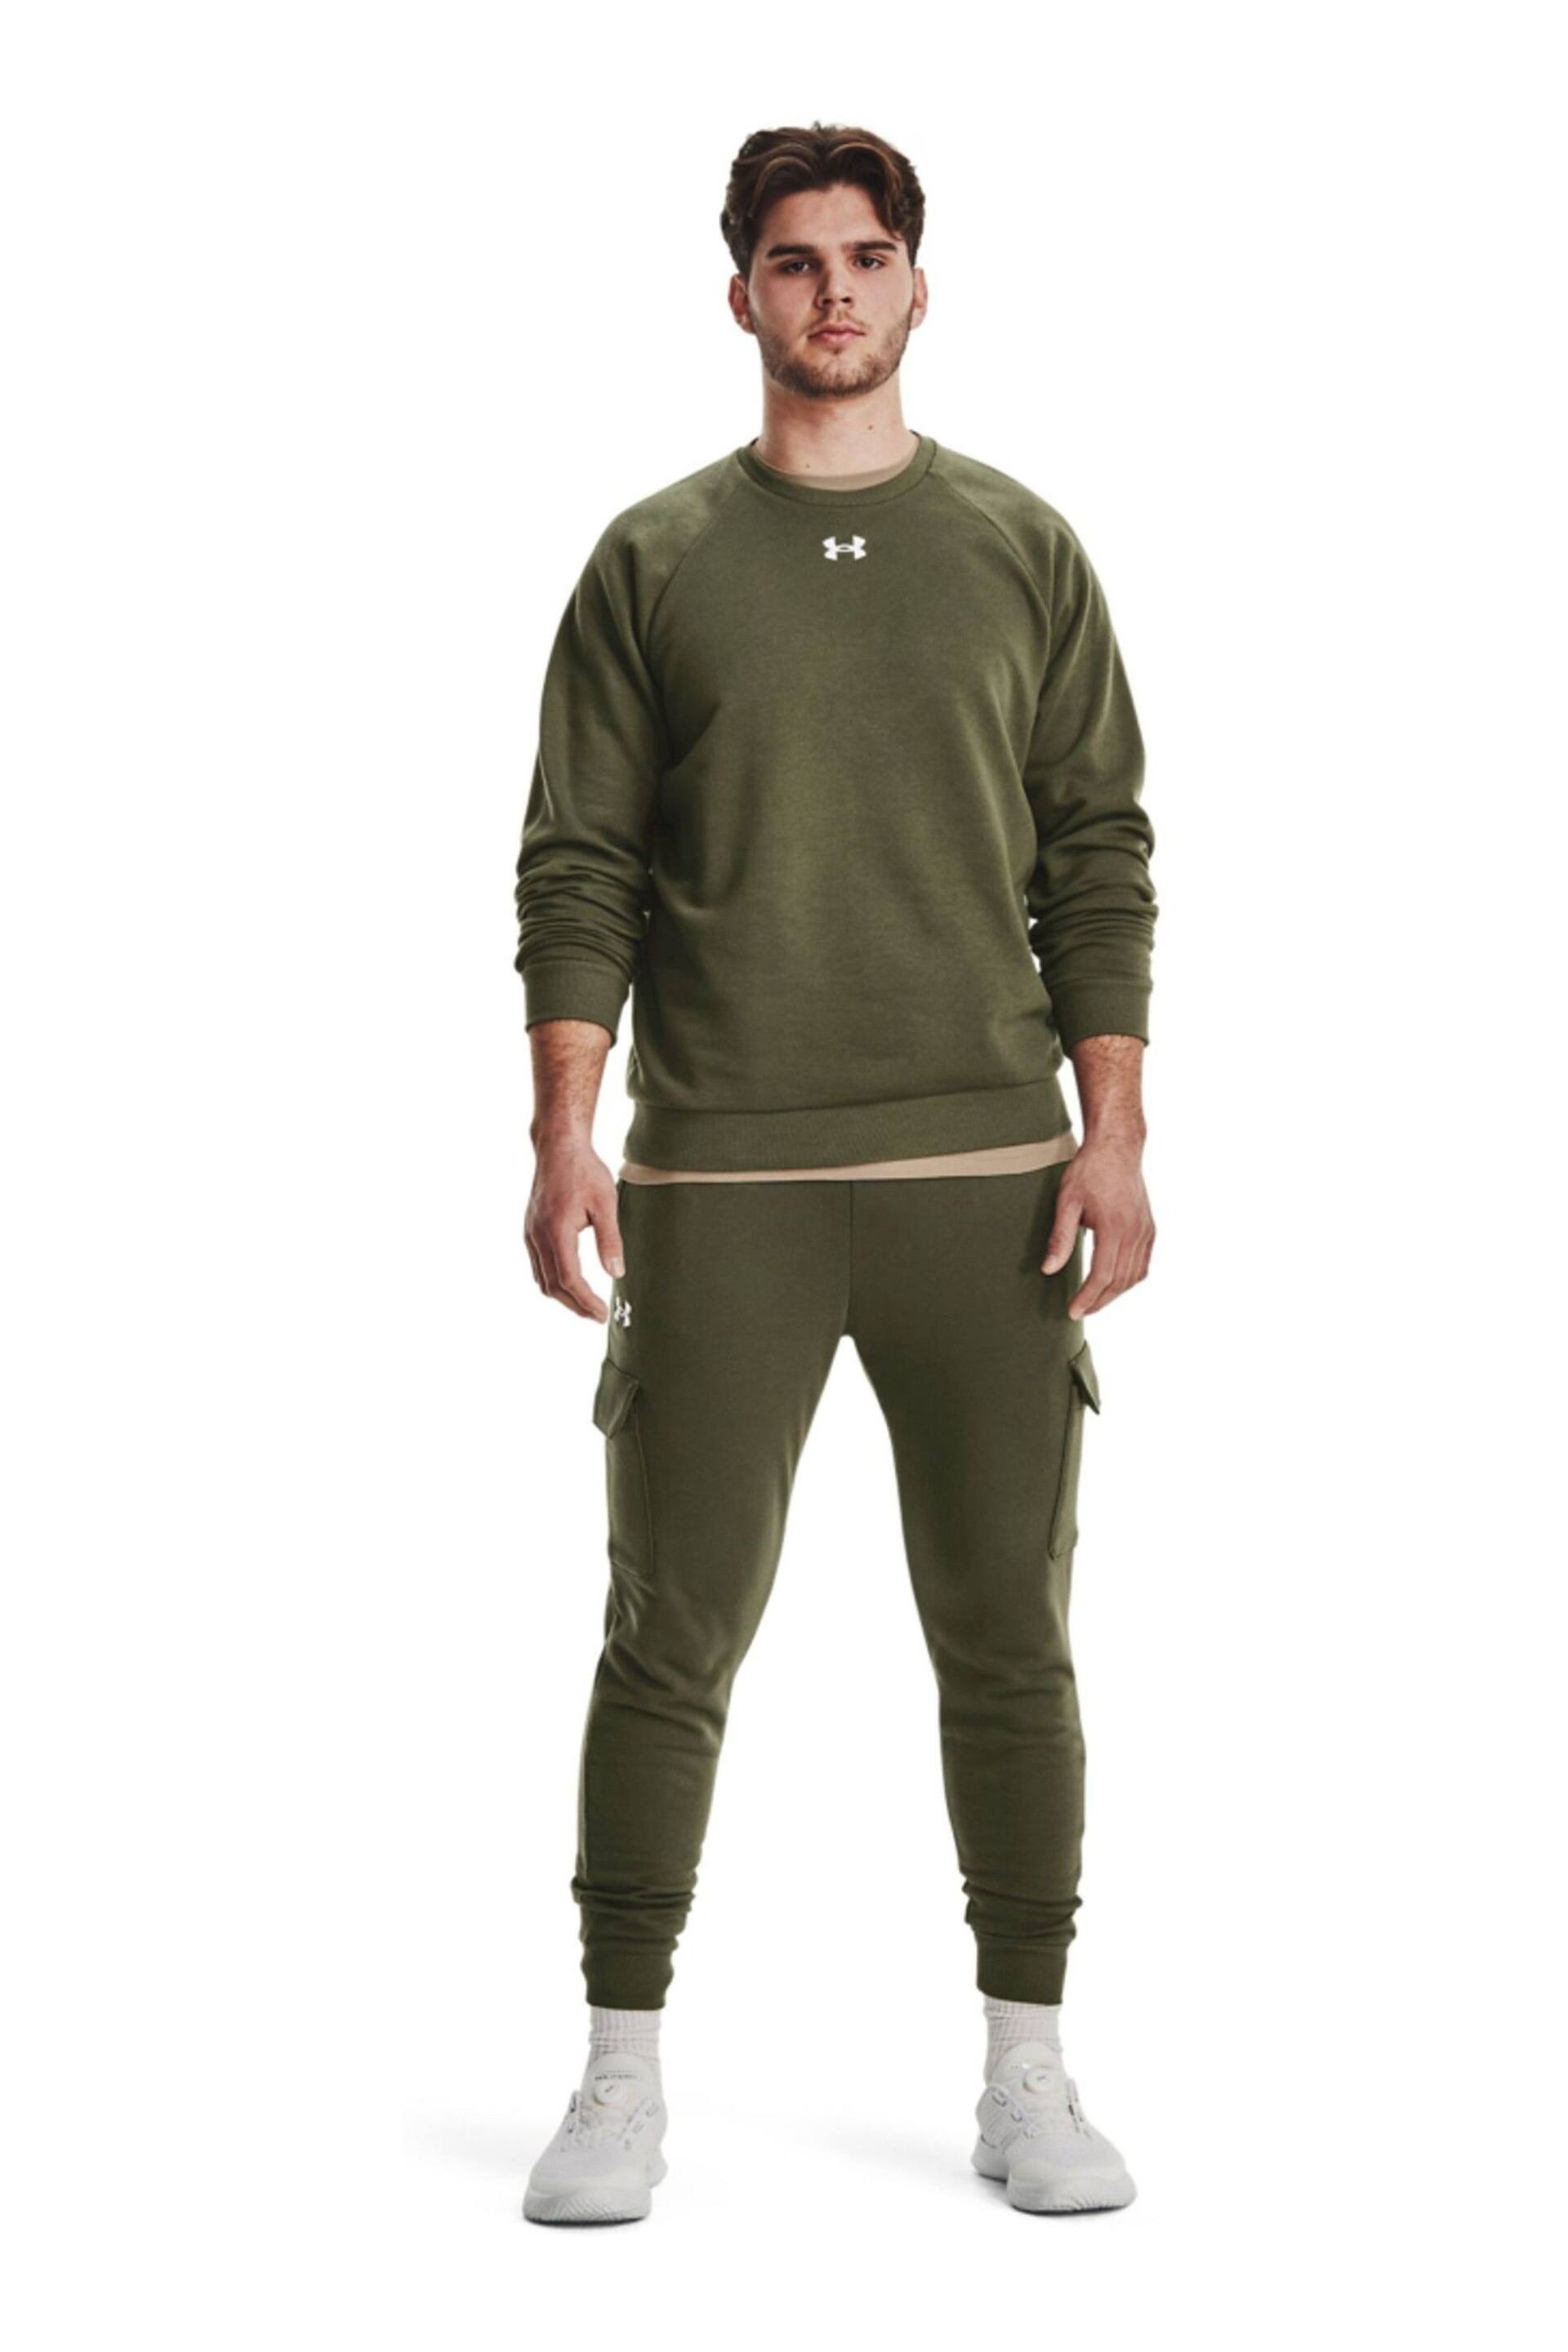 Under Armour Green Rival Sweatshirt - Image 3 of 6